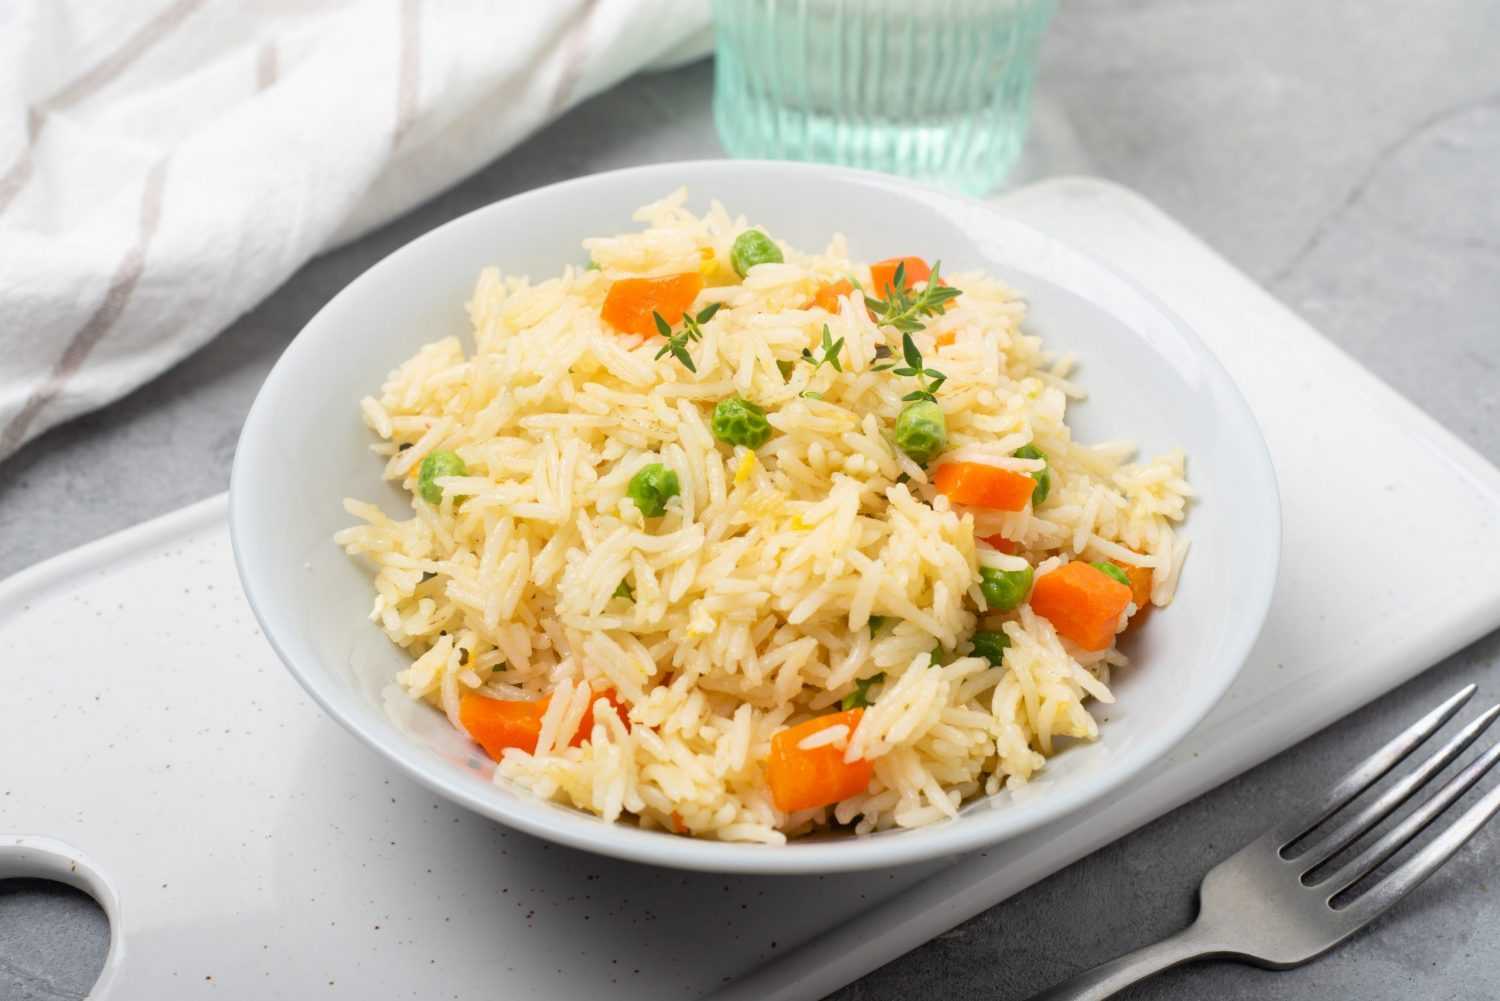 Cooked rice mixed with peas and carrot cubes served in a white plate